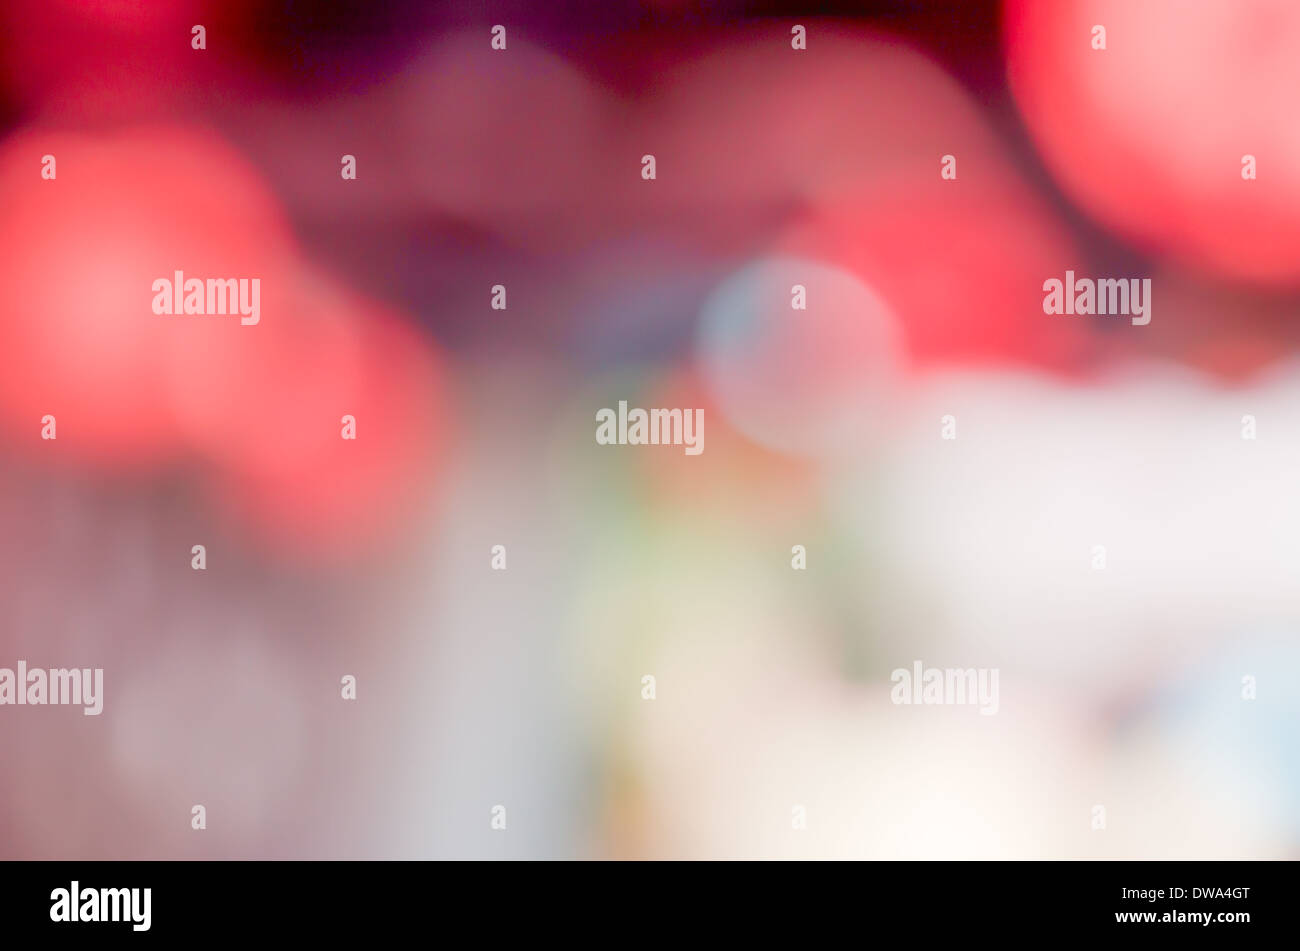 Artistic style - Defocused abstract texture background for your design Stock Photo